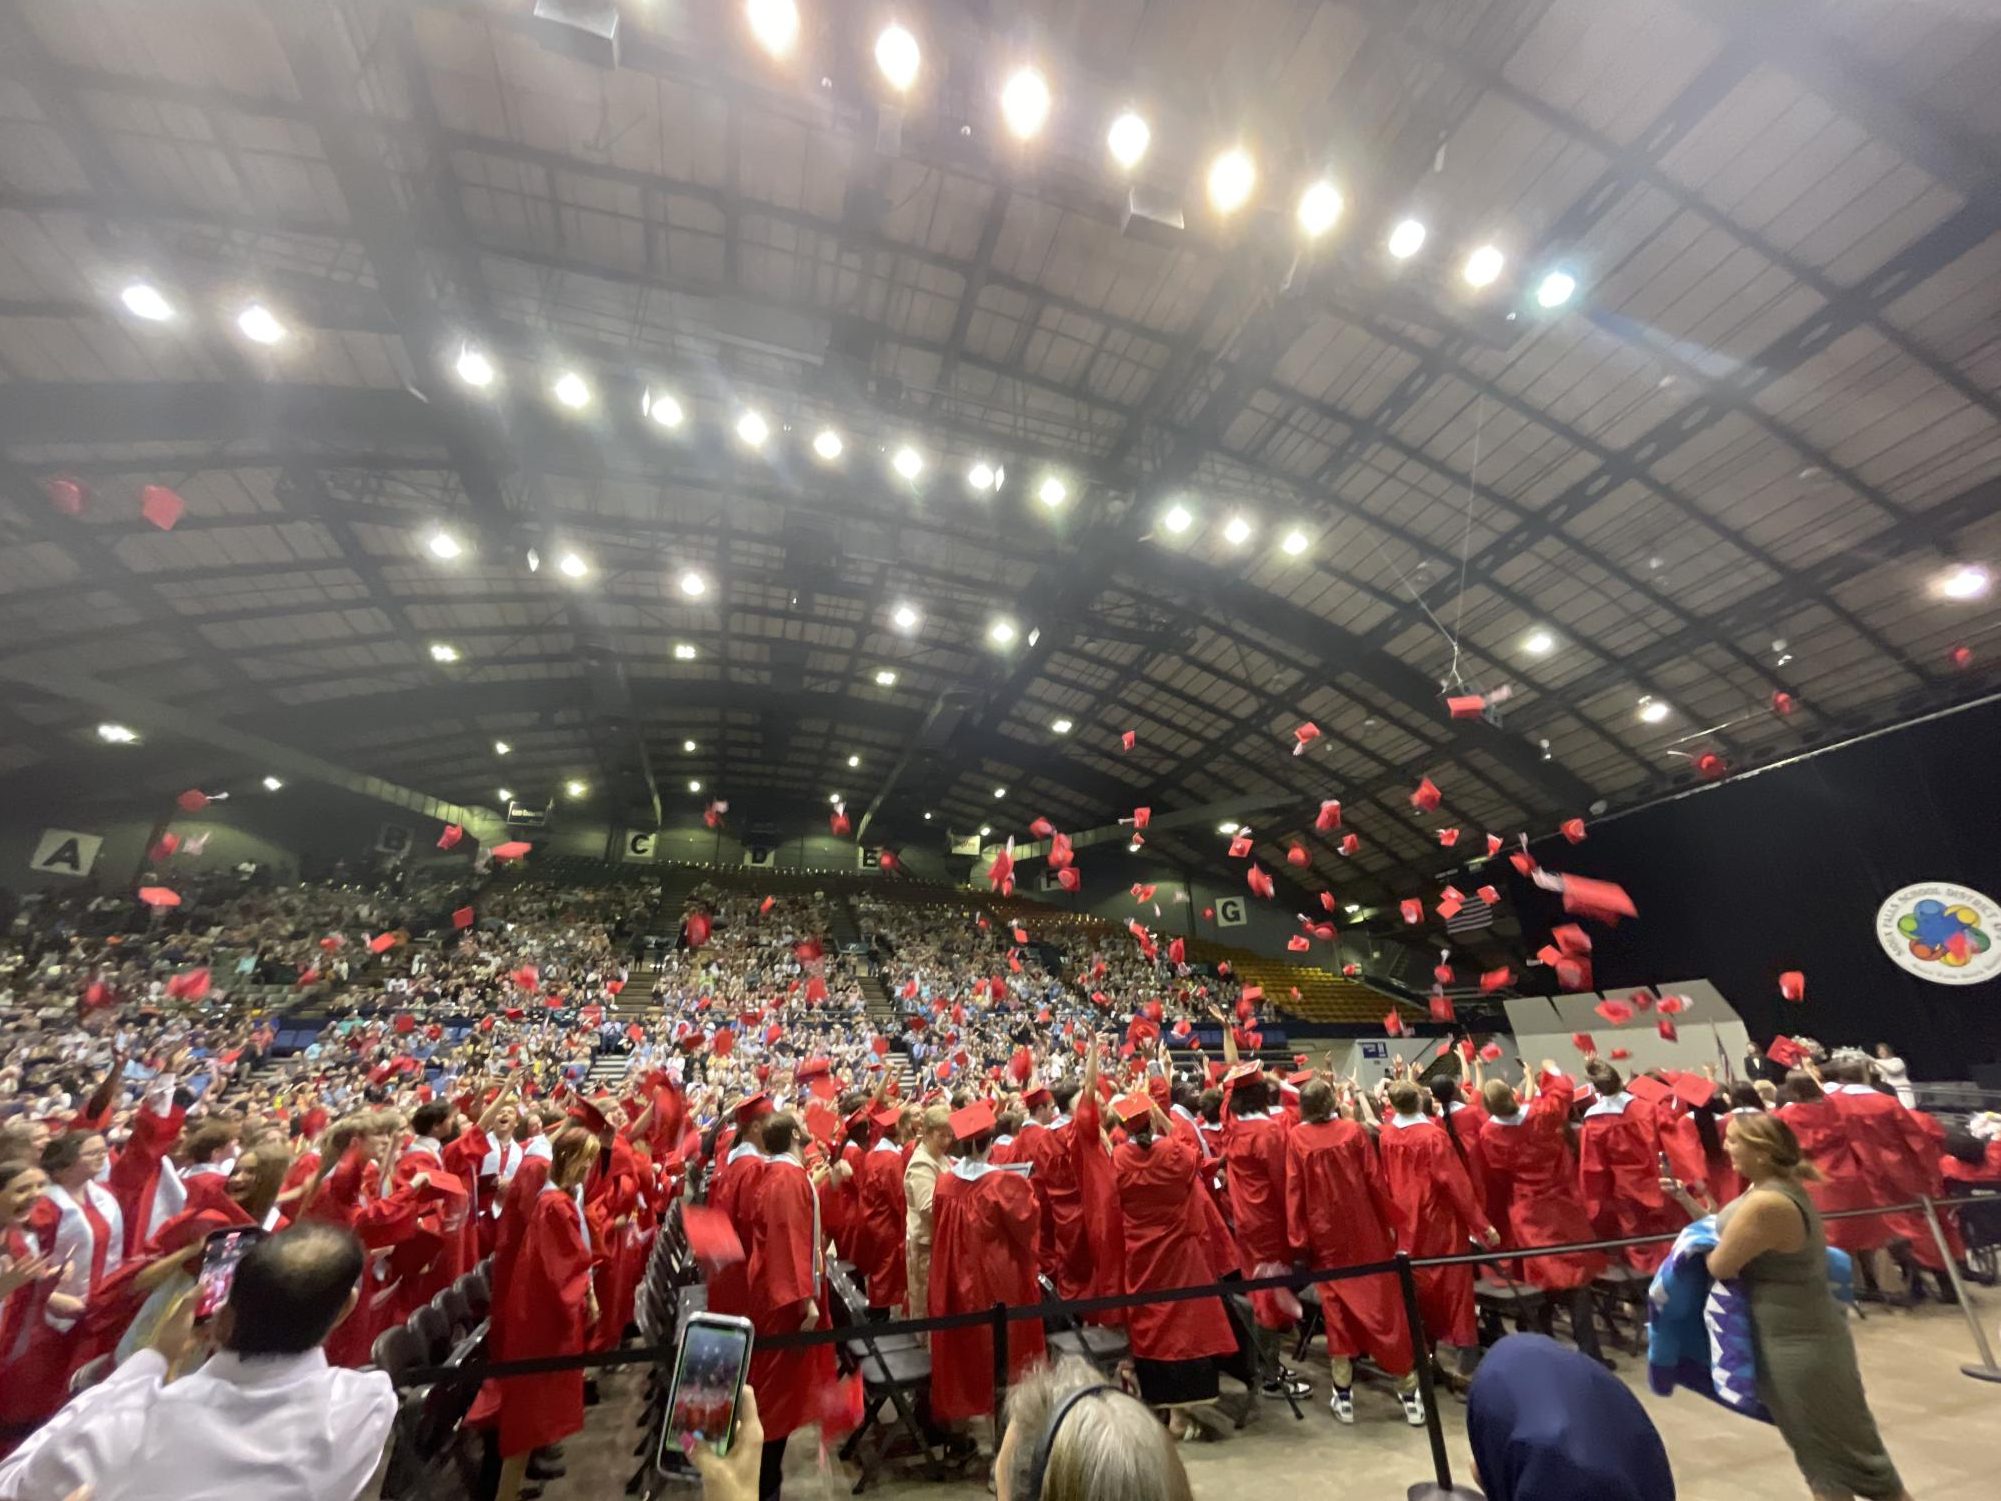 The class of 2023 throwing their graduation caps after they walked the stage at the Denny Sanford Premier Center.